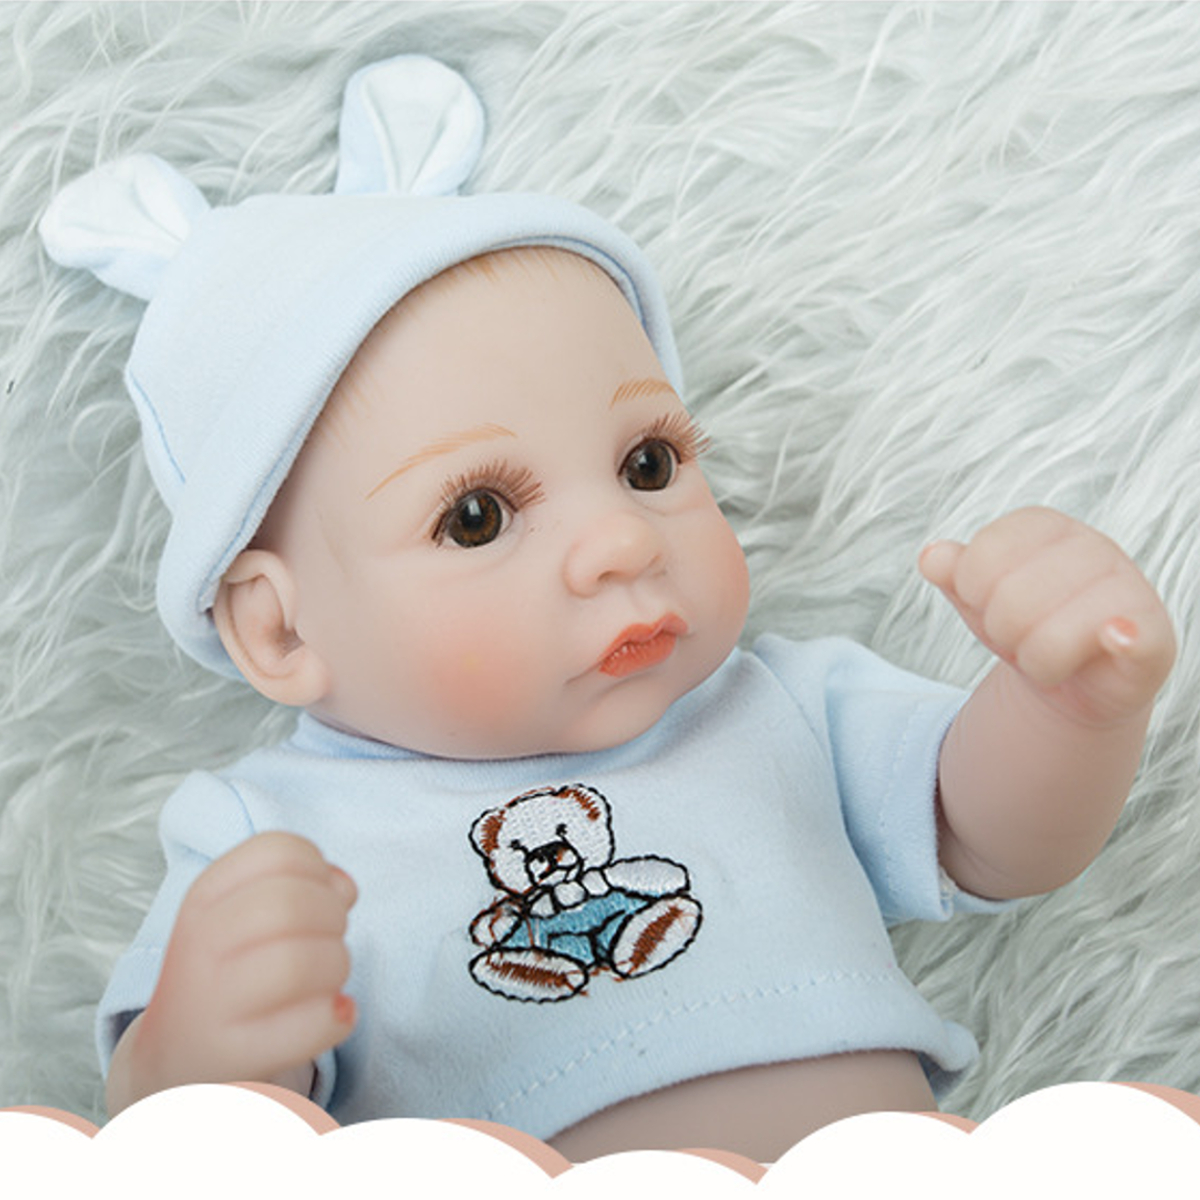 28CM-Silicone-Realistic-Sleeping-Reborns-Lifelike-Newborn-Baby-Doll-Toy-with-Moveable-Head-Arms-And--1817558-6